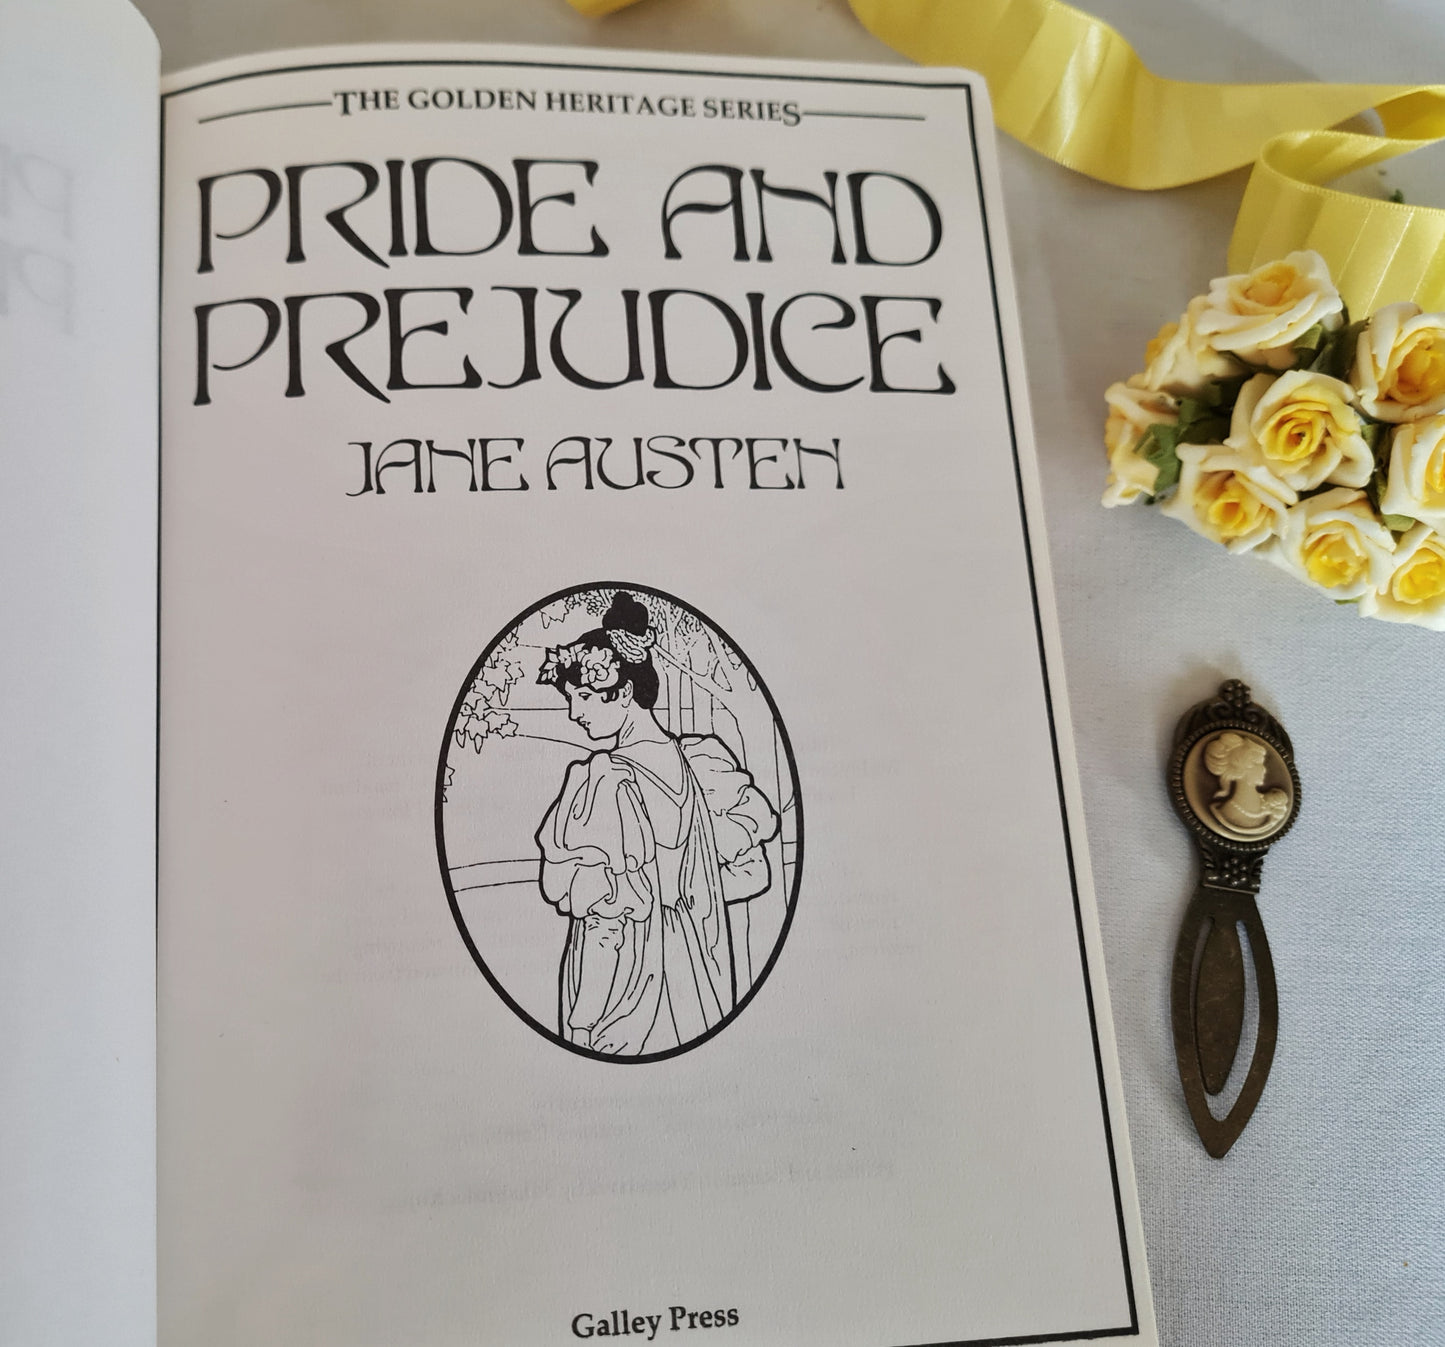 1987 Pride and Prejudice by Jane Austen / Galley Press, London / Vintage Hardback / With Dust Jacket / Good Condition